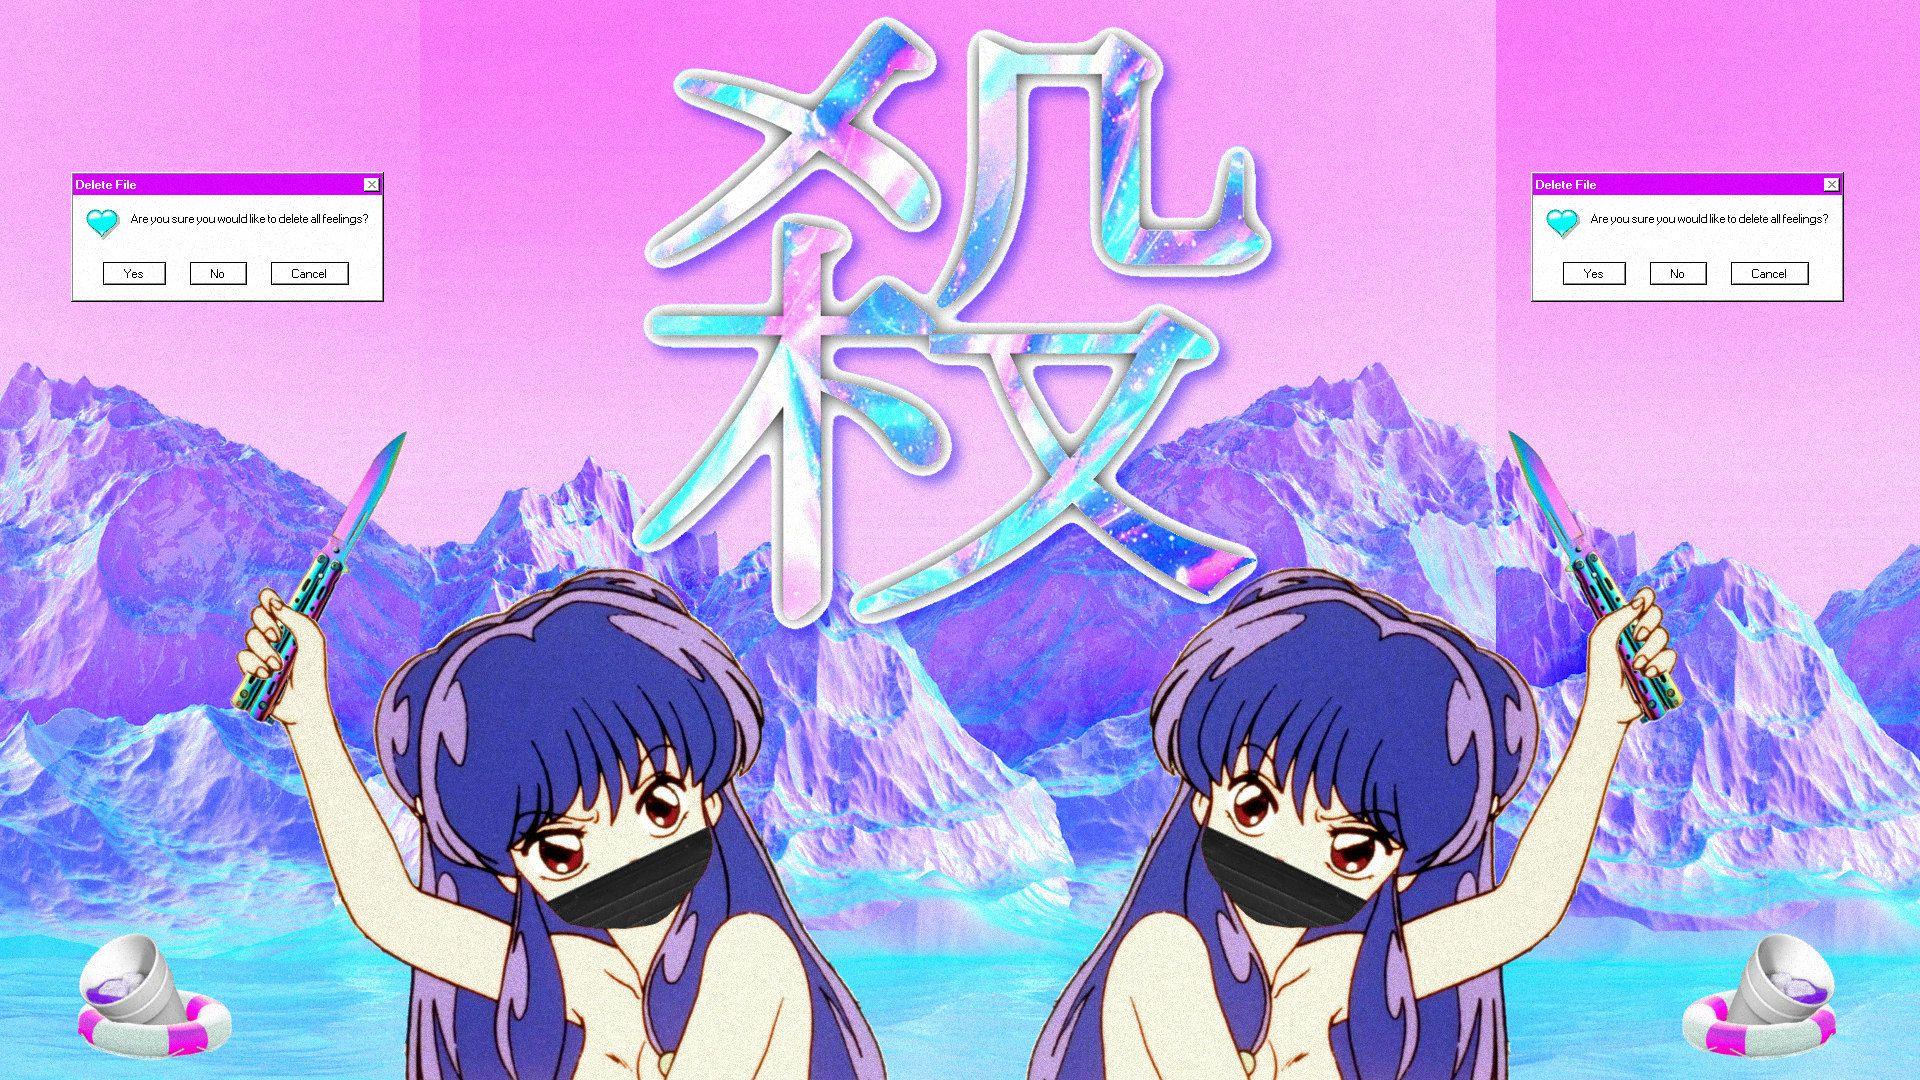 Nintendo Switch-Chan in 90's anime aesthetic 💙 ❤️ | Nintendo Switch | Know  Your Meme